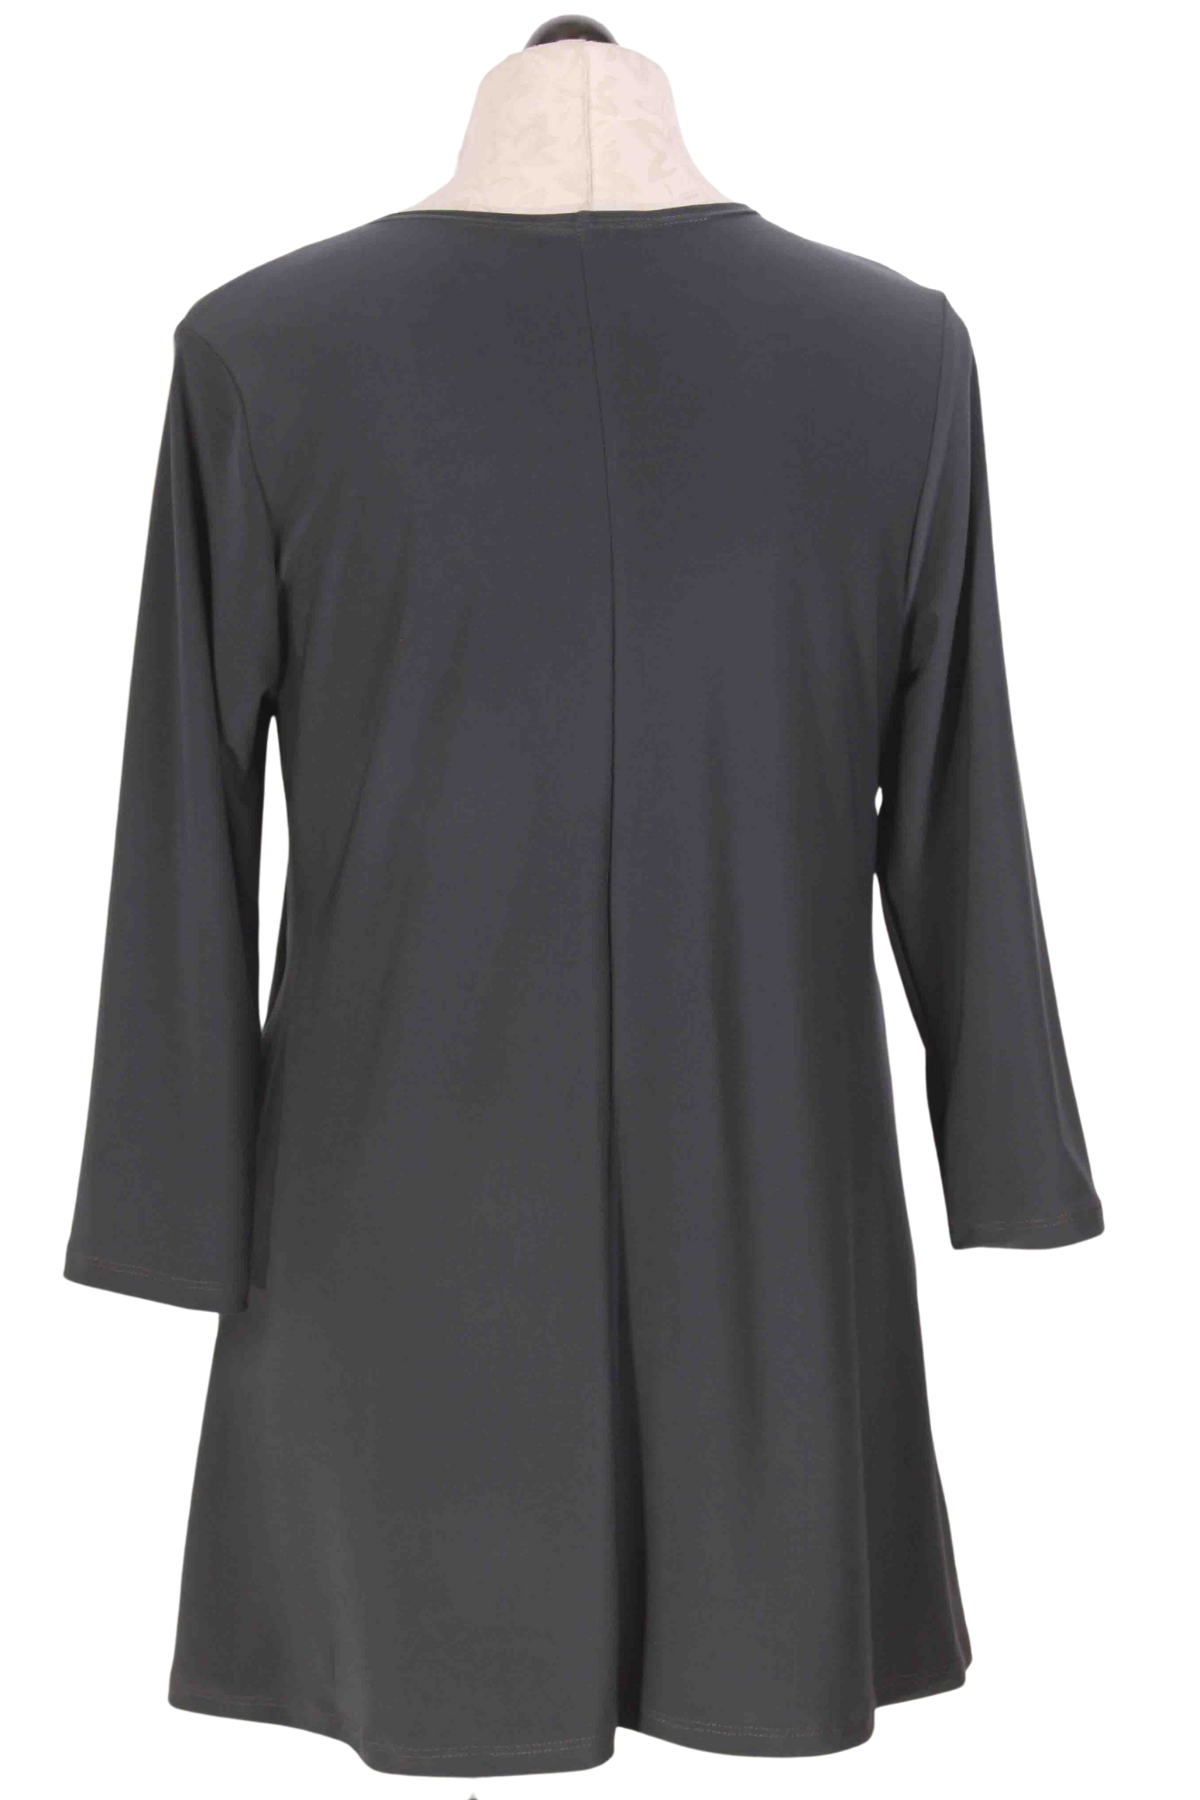 back view of grey Long Sleeve V Neck Tunic by Reina Lee